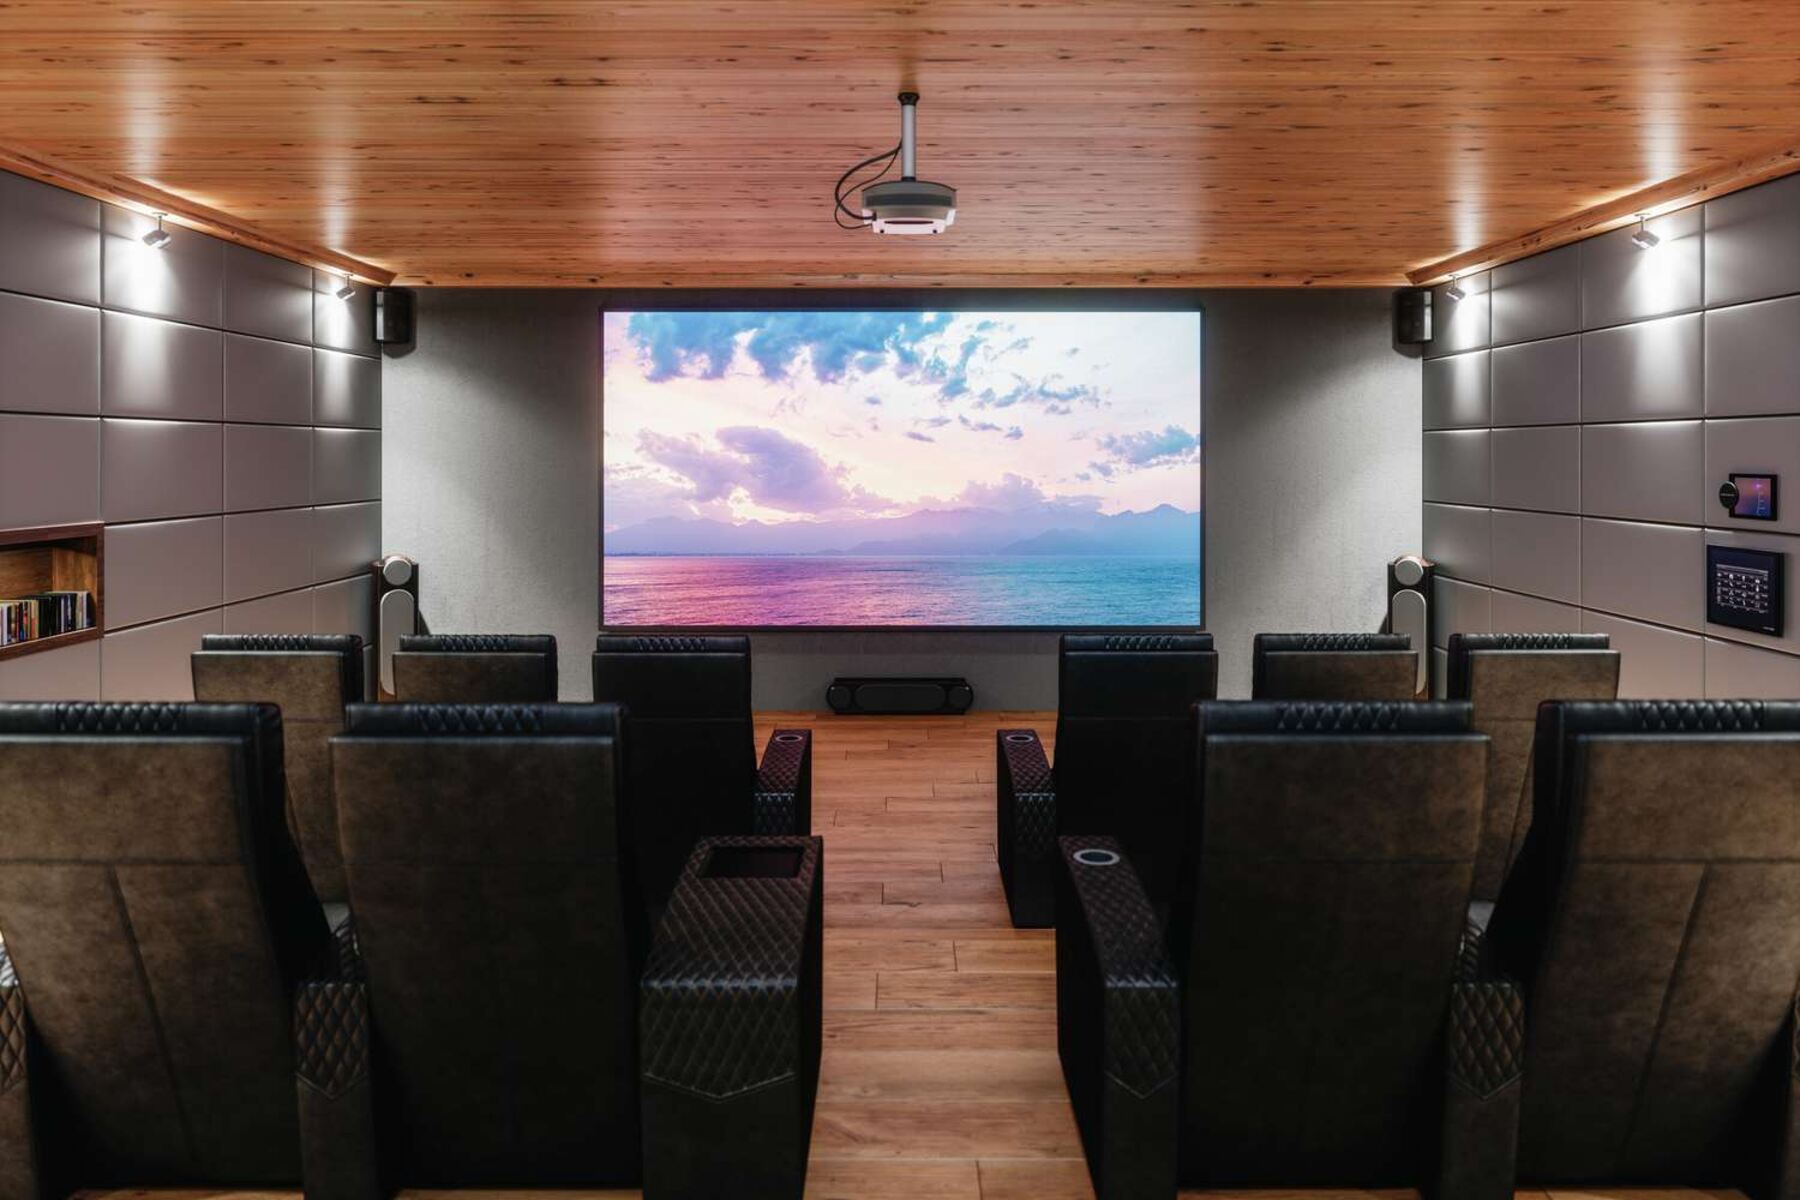 How To Setup A Home Theater Projector